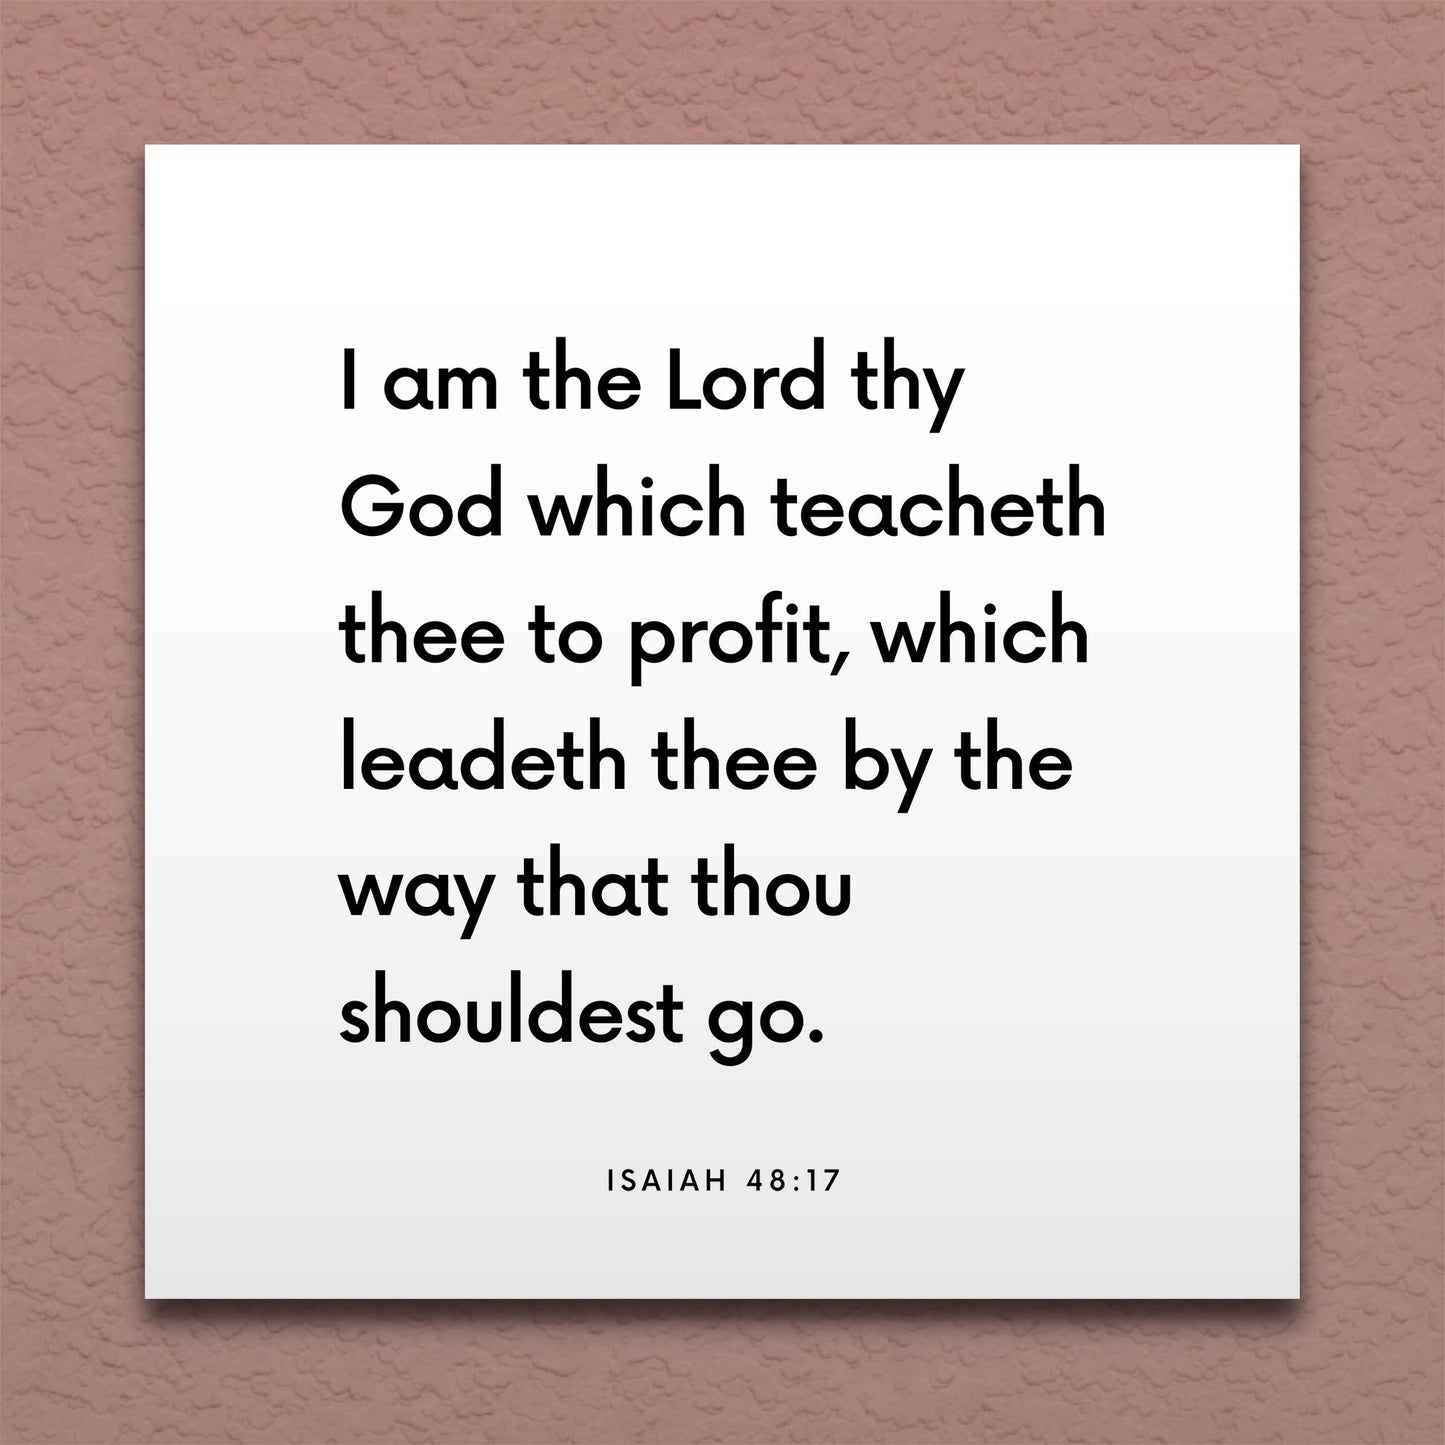 Wall-mounted scripture tile for Isaiah 48:17 - "I am the Lord thy God which teacheth thee to profit"